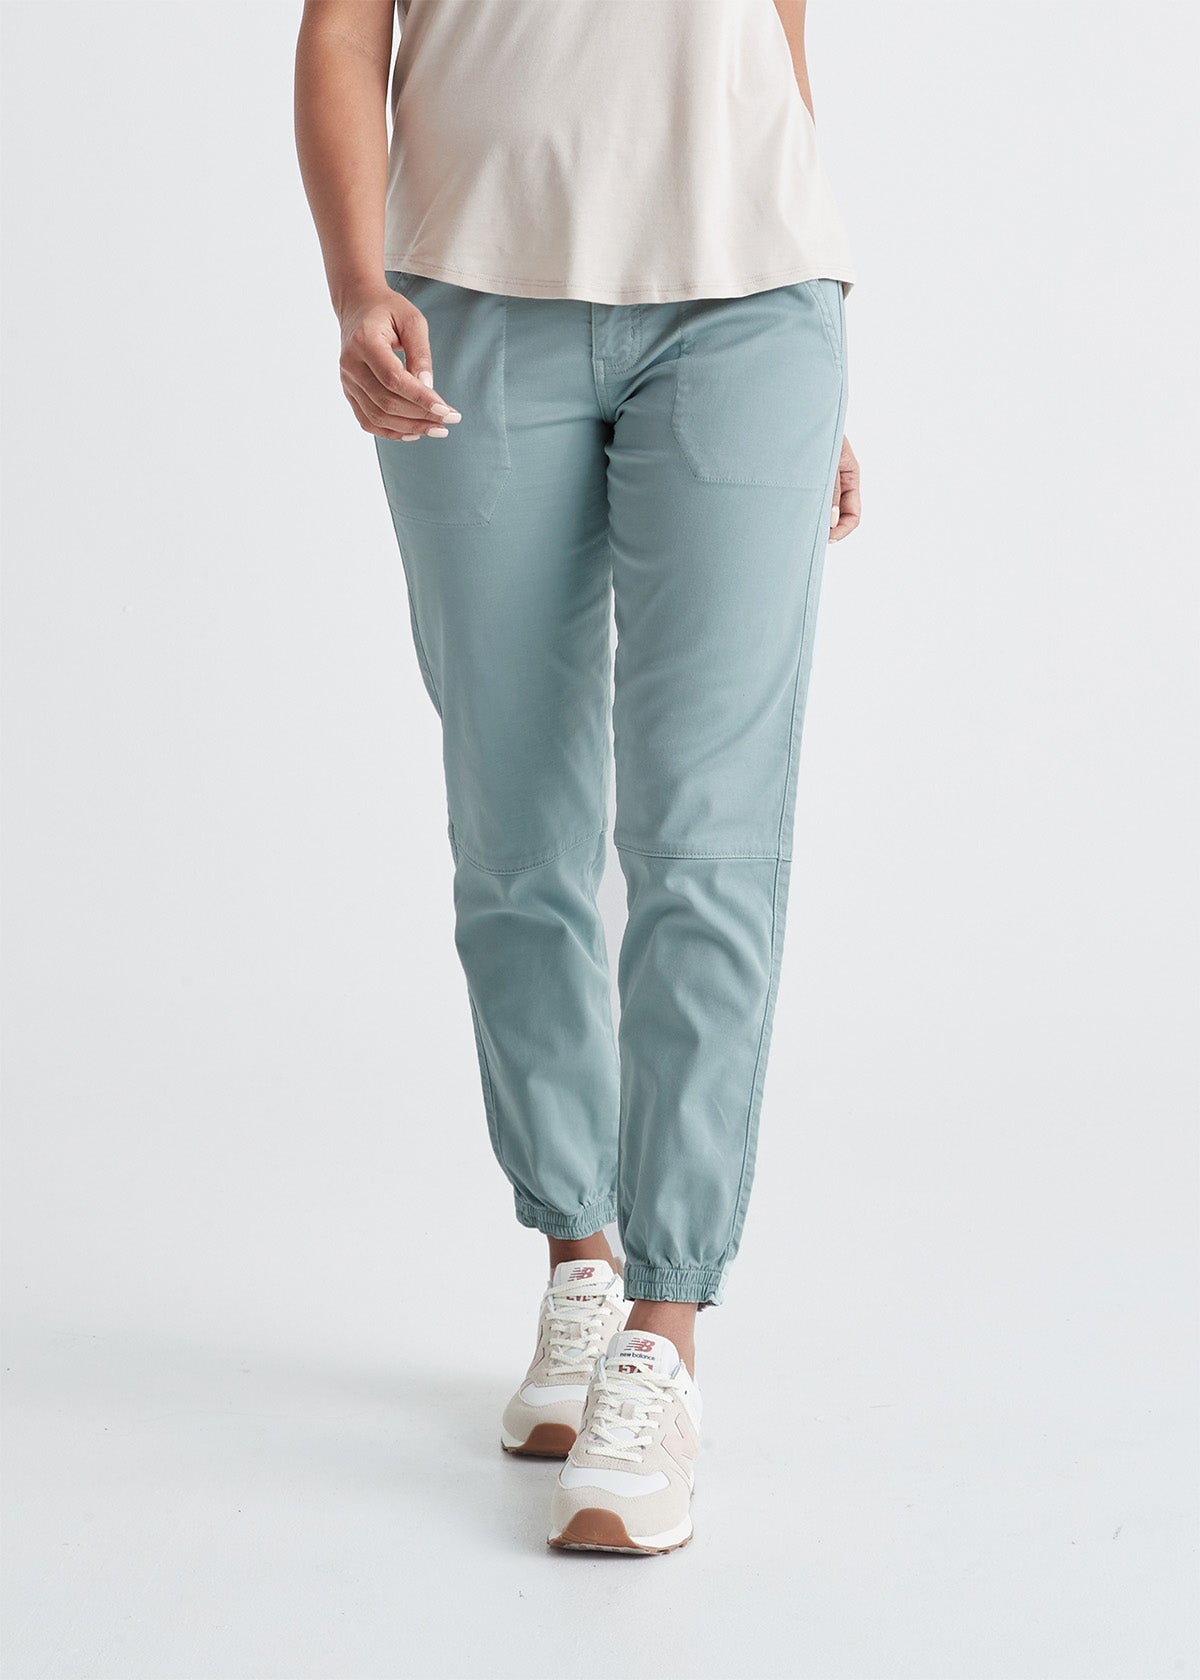 womens high rise light blue athletic jogger front